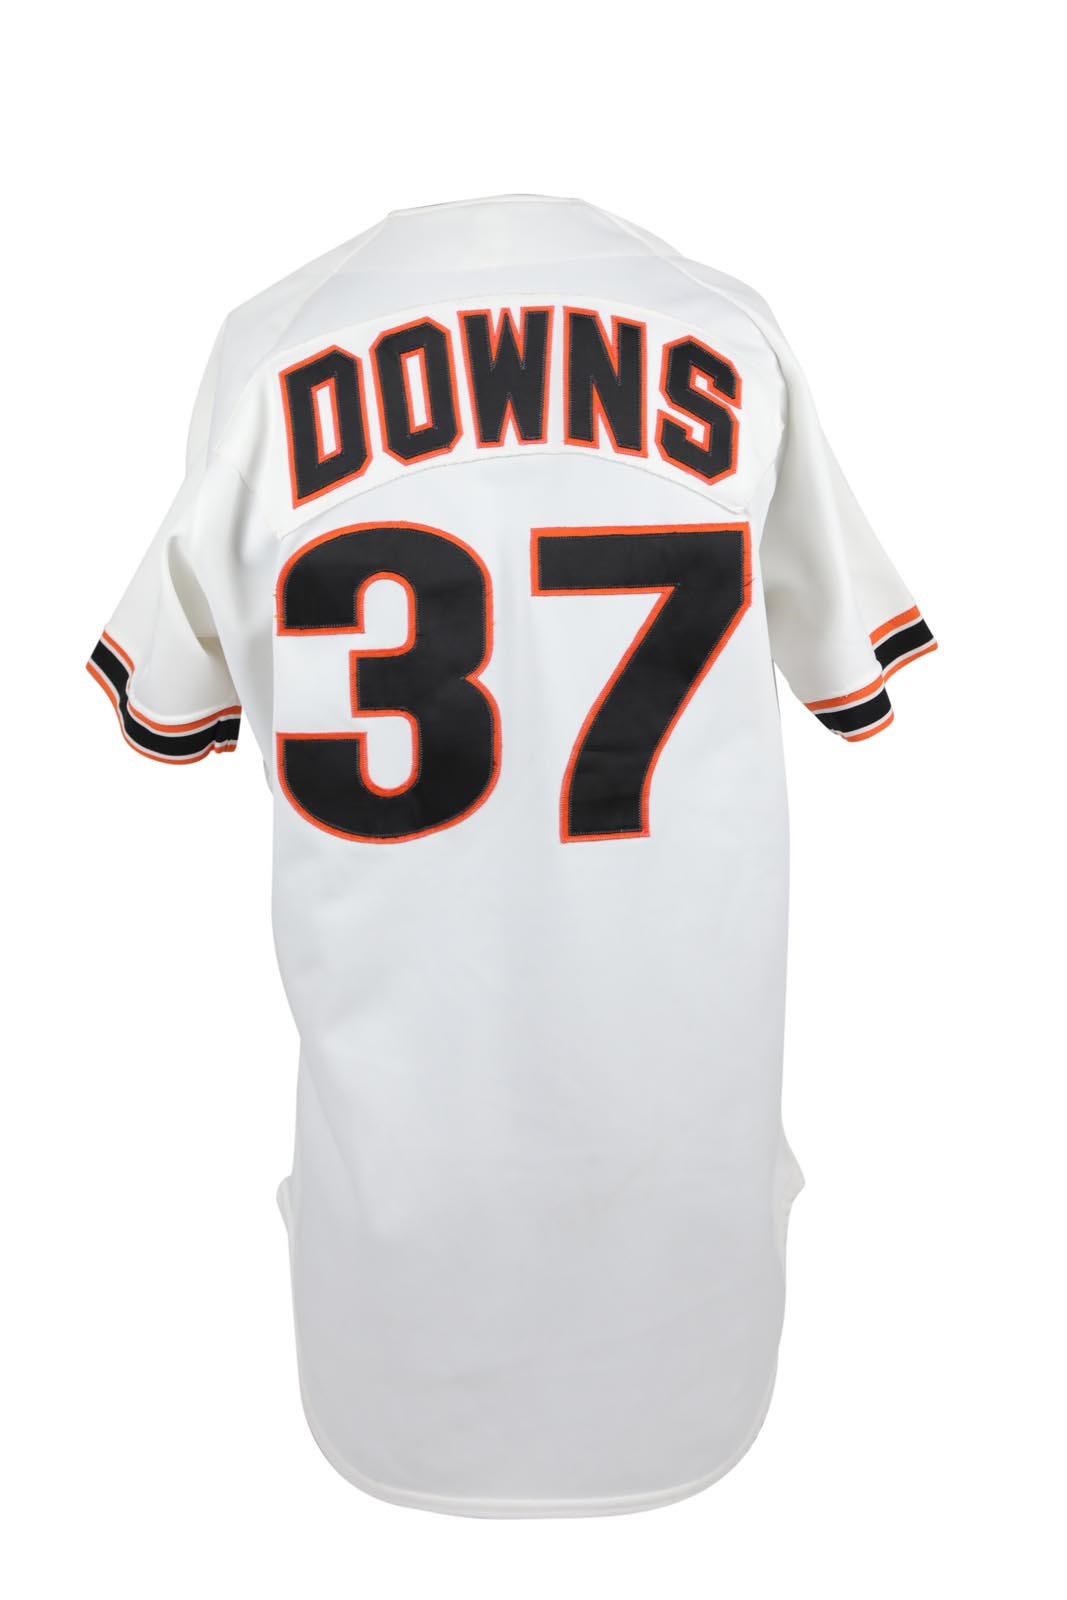 1987 Kelly Downs San Francisco Giants Game Worn Jersey